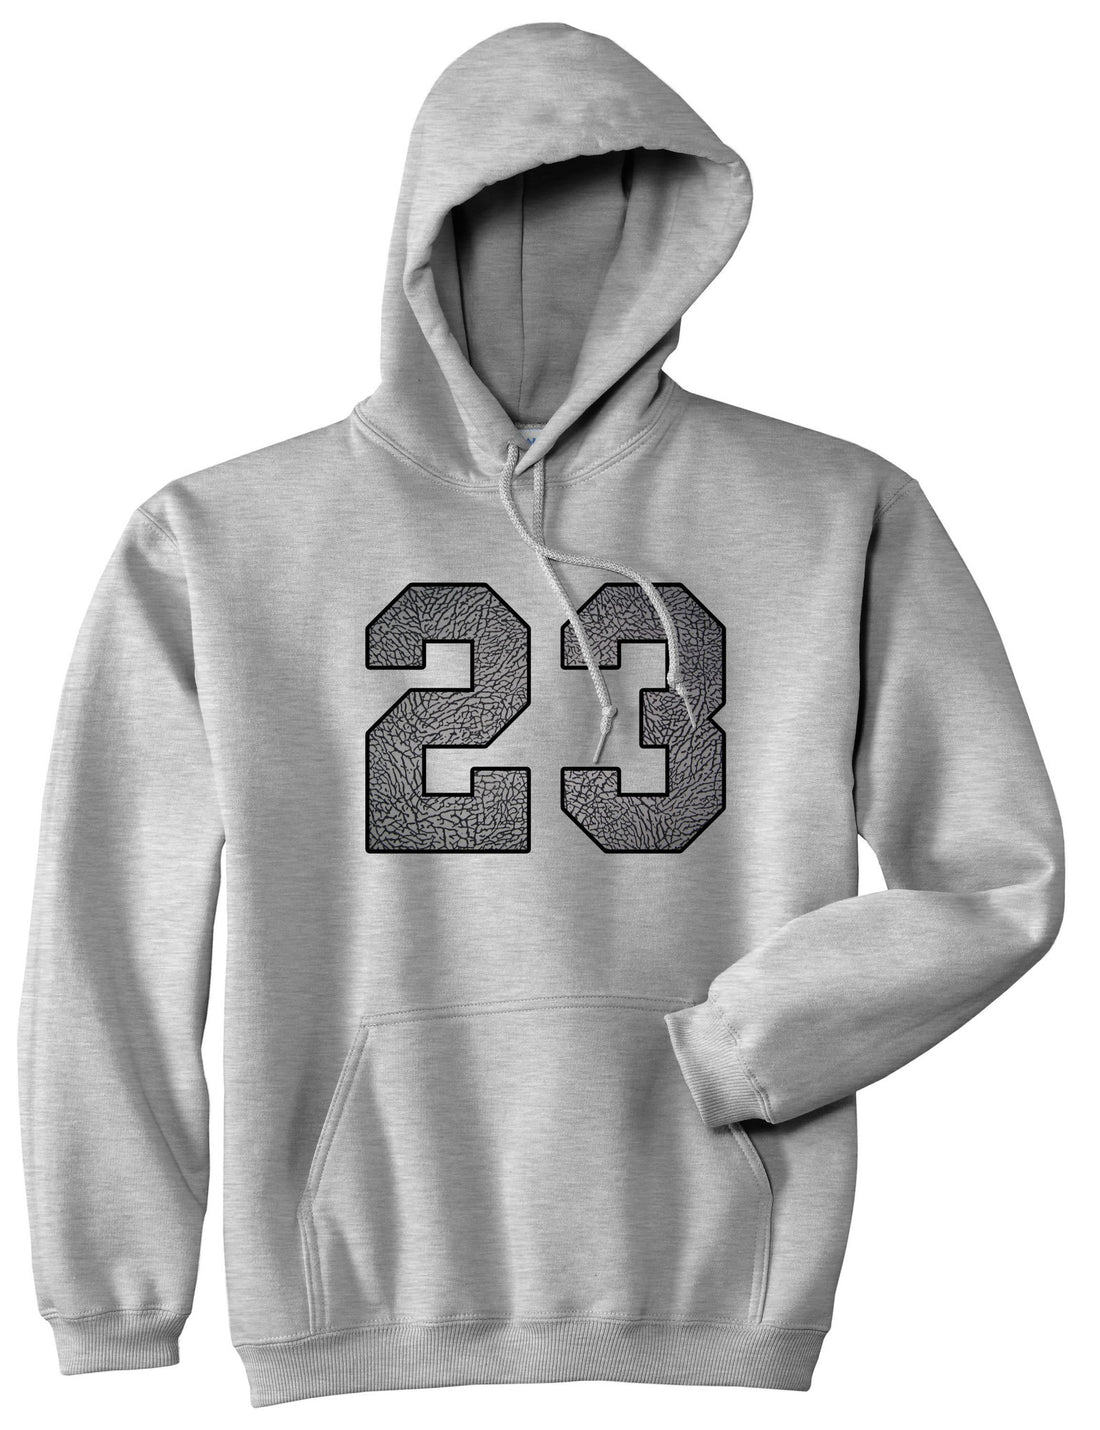 23 Cement Jersey Pullover Hoodie in Grey By Kings Of NY